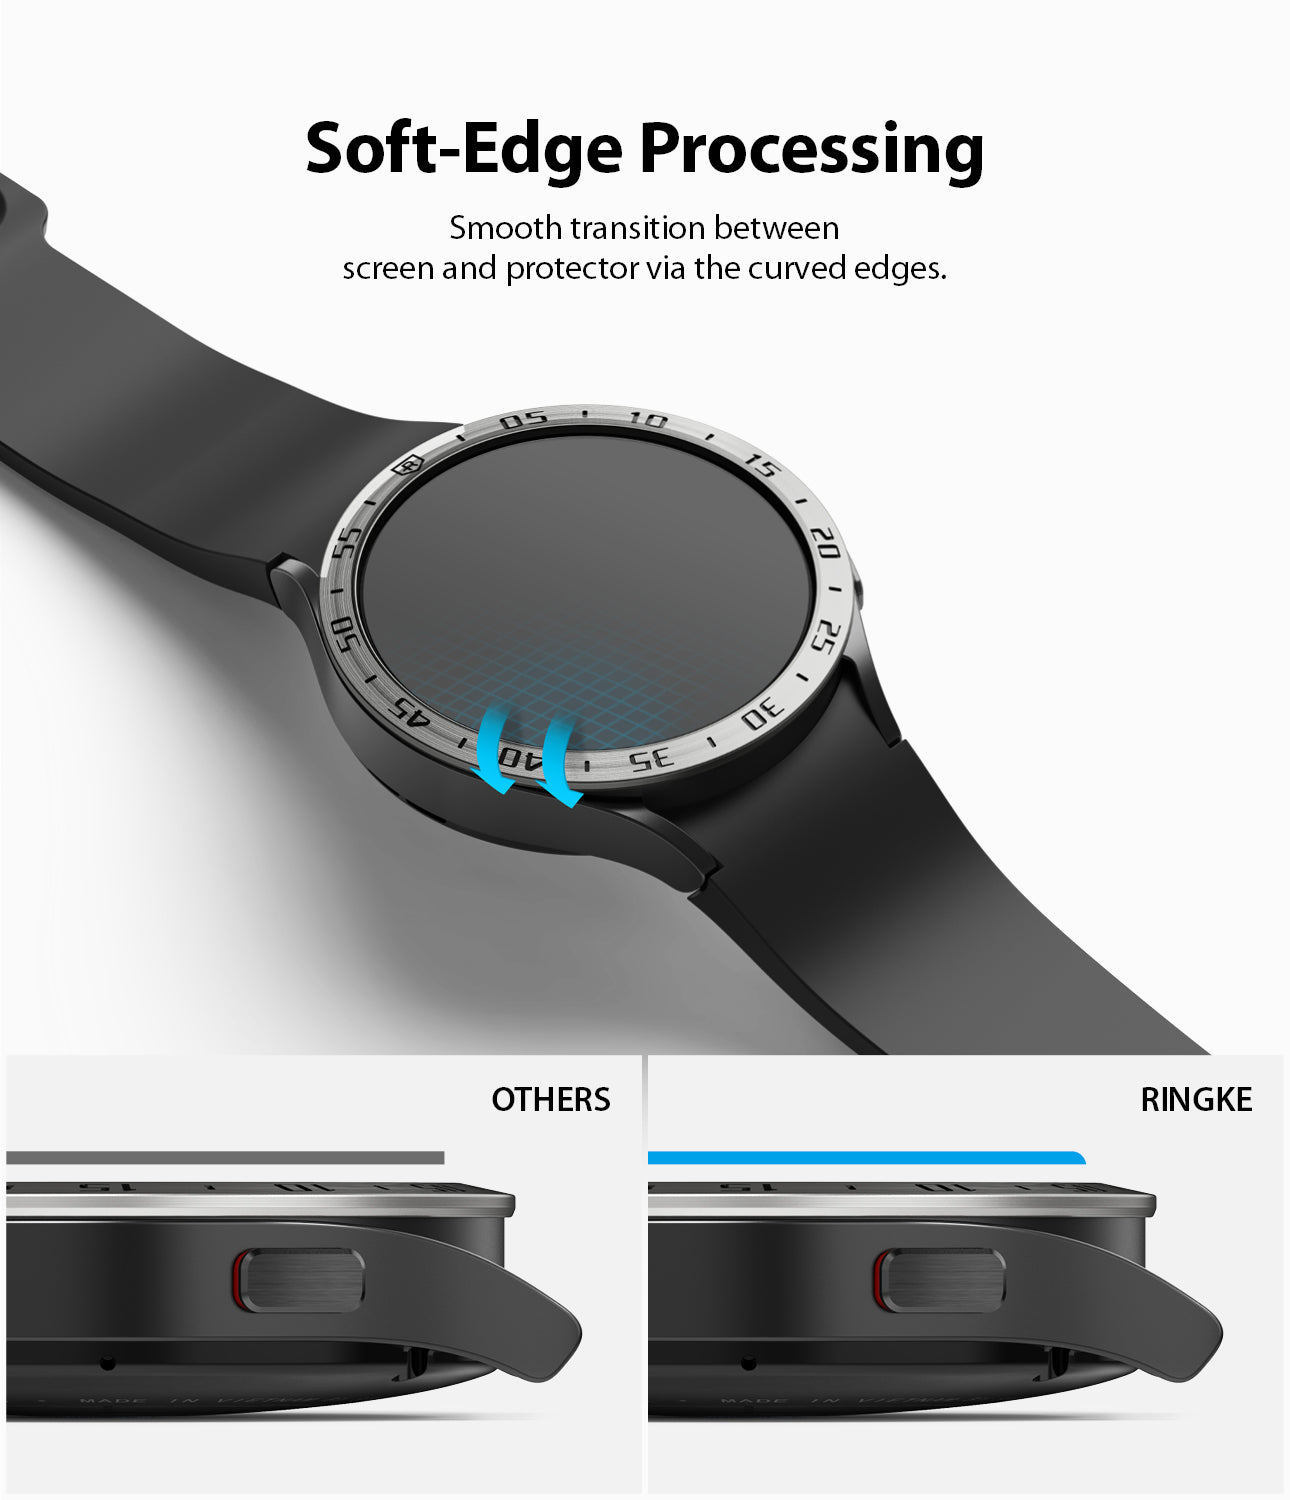 Galaxy Watch 5/4 Screen Protector for Bezel Styling | Glass - R Series